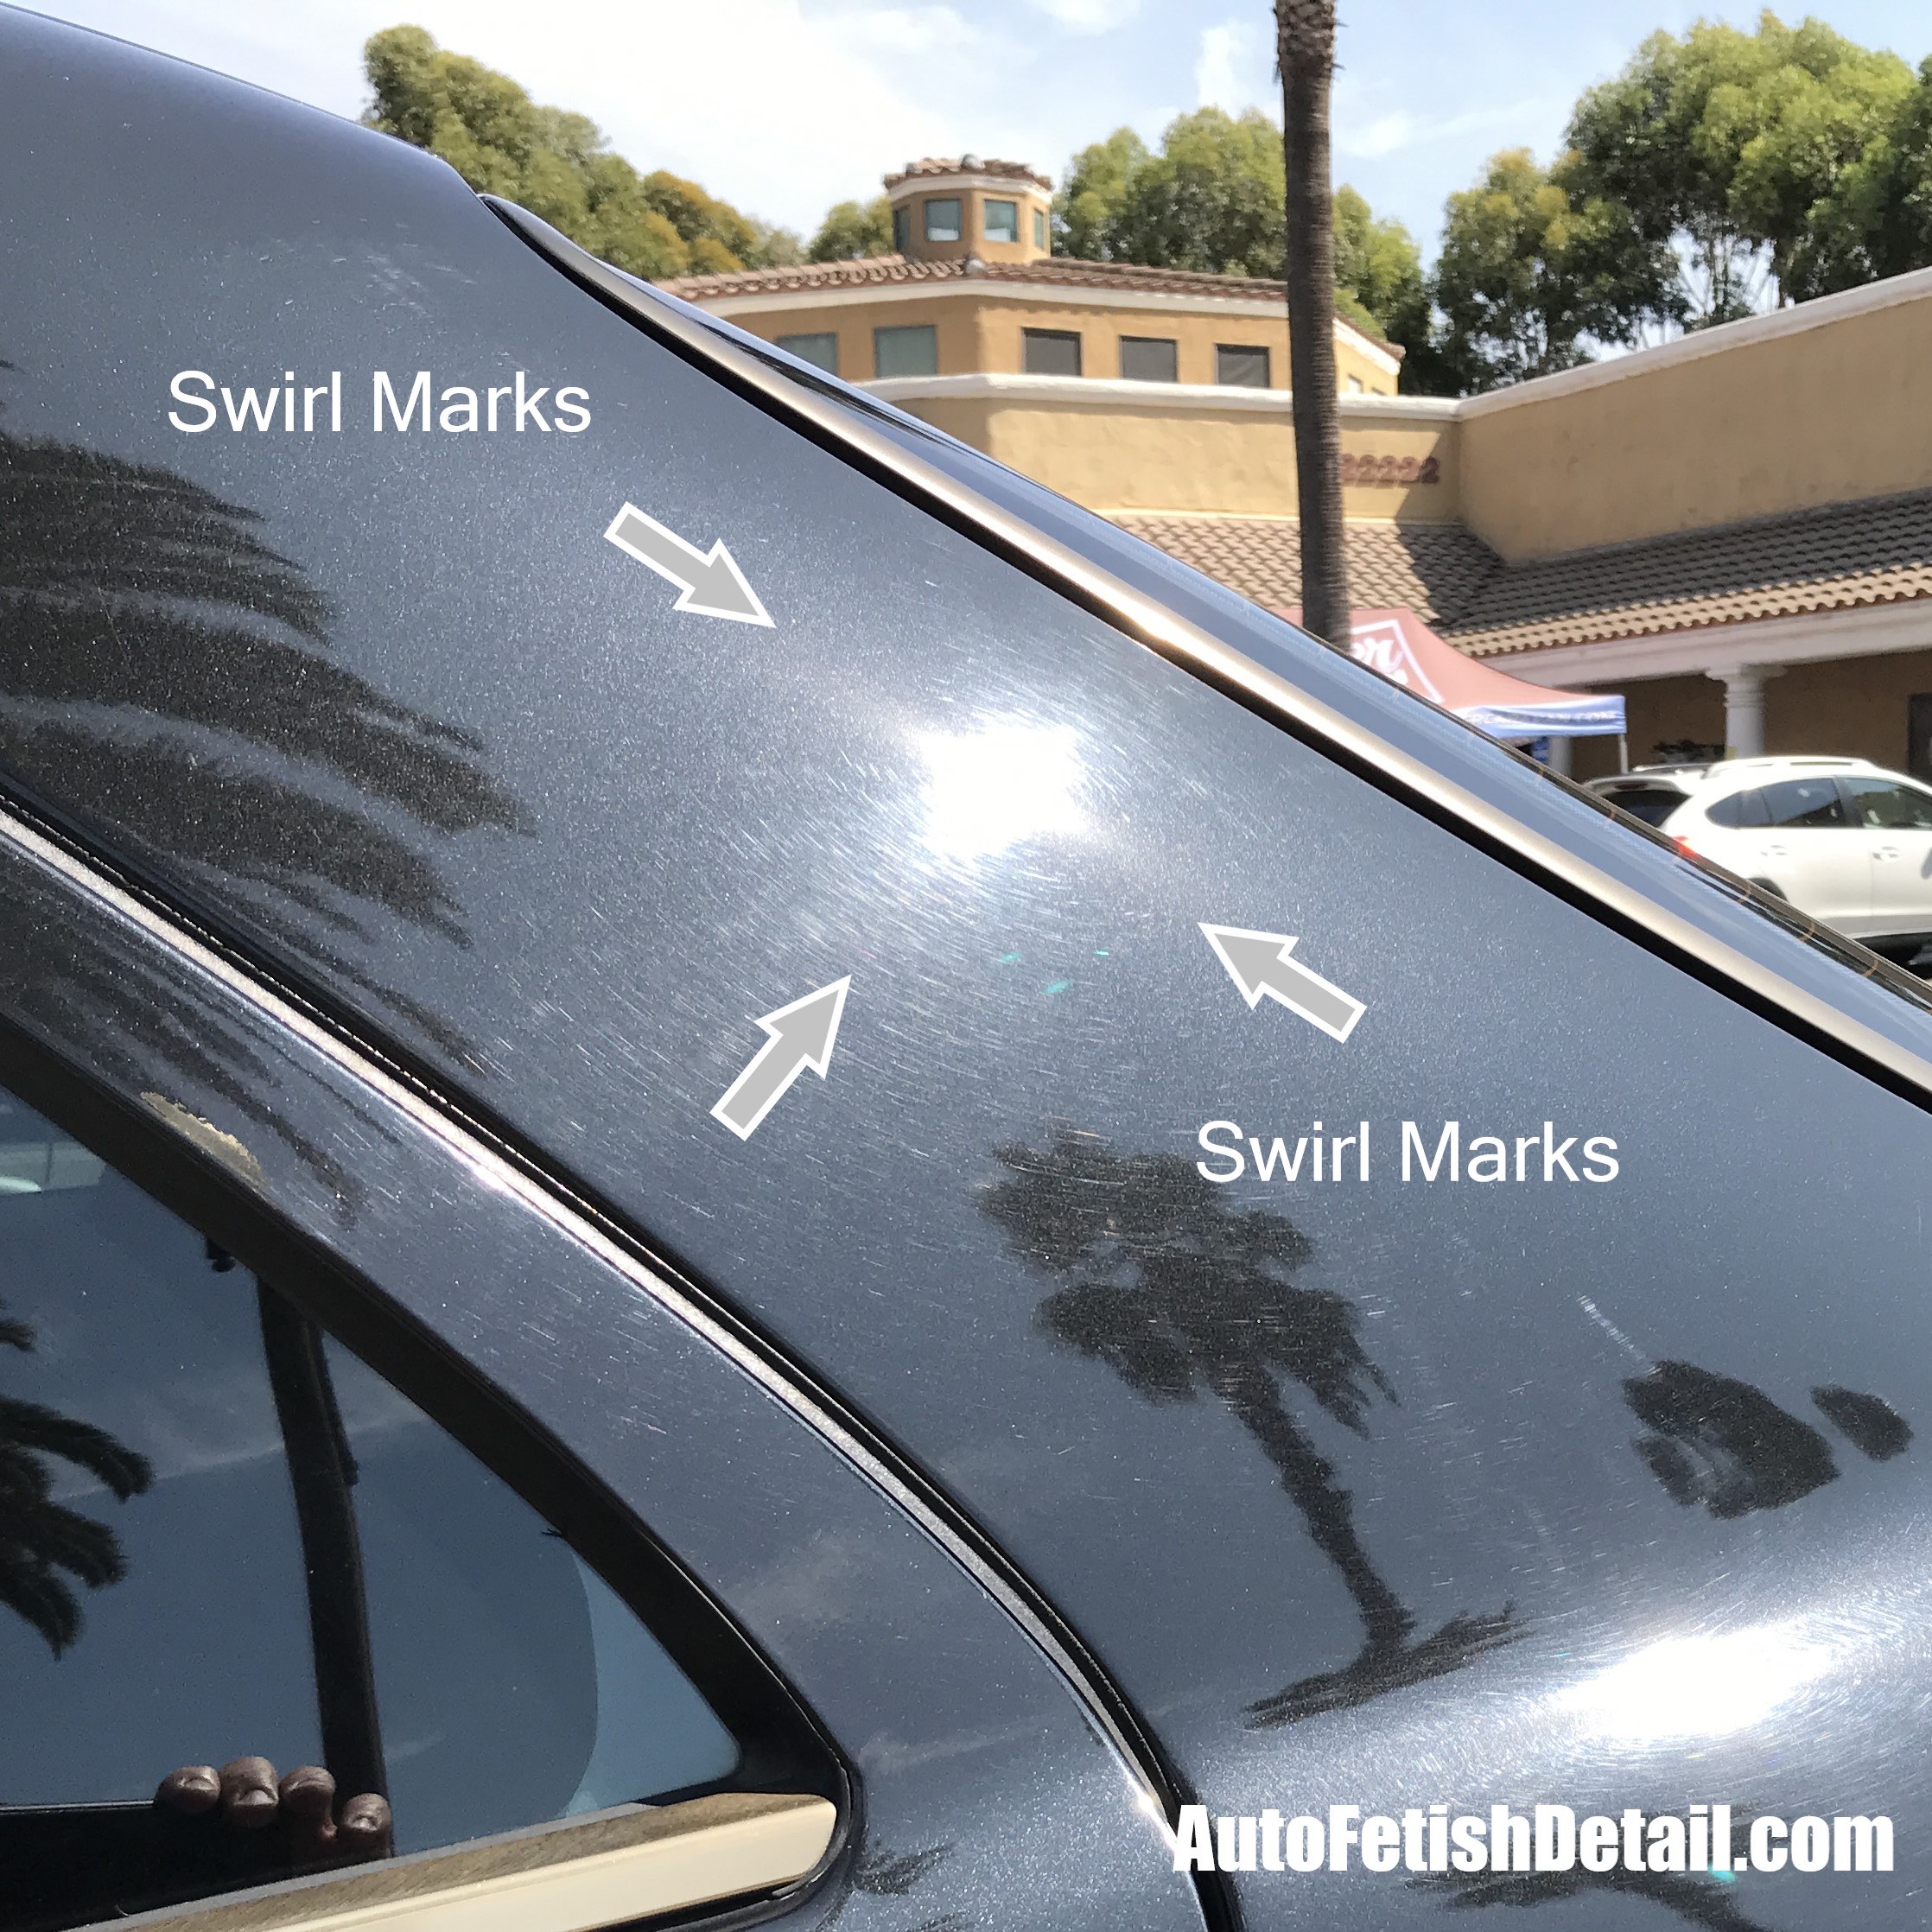 Is using wax to remove swirl marks as ineffective as it is said?